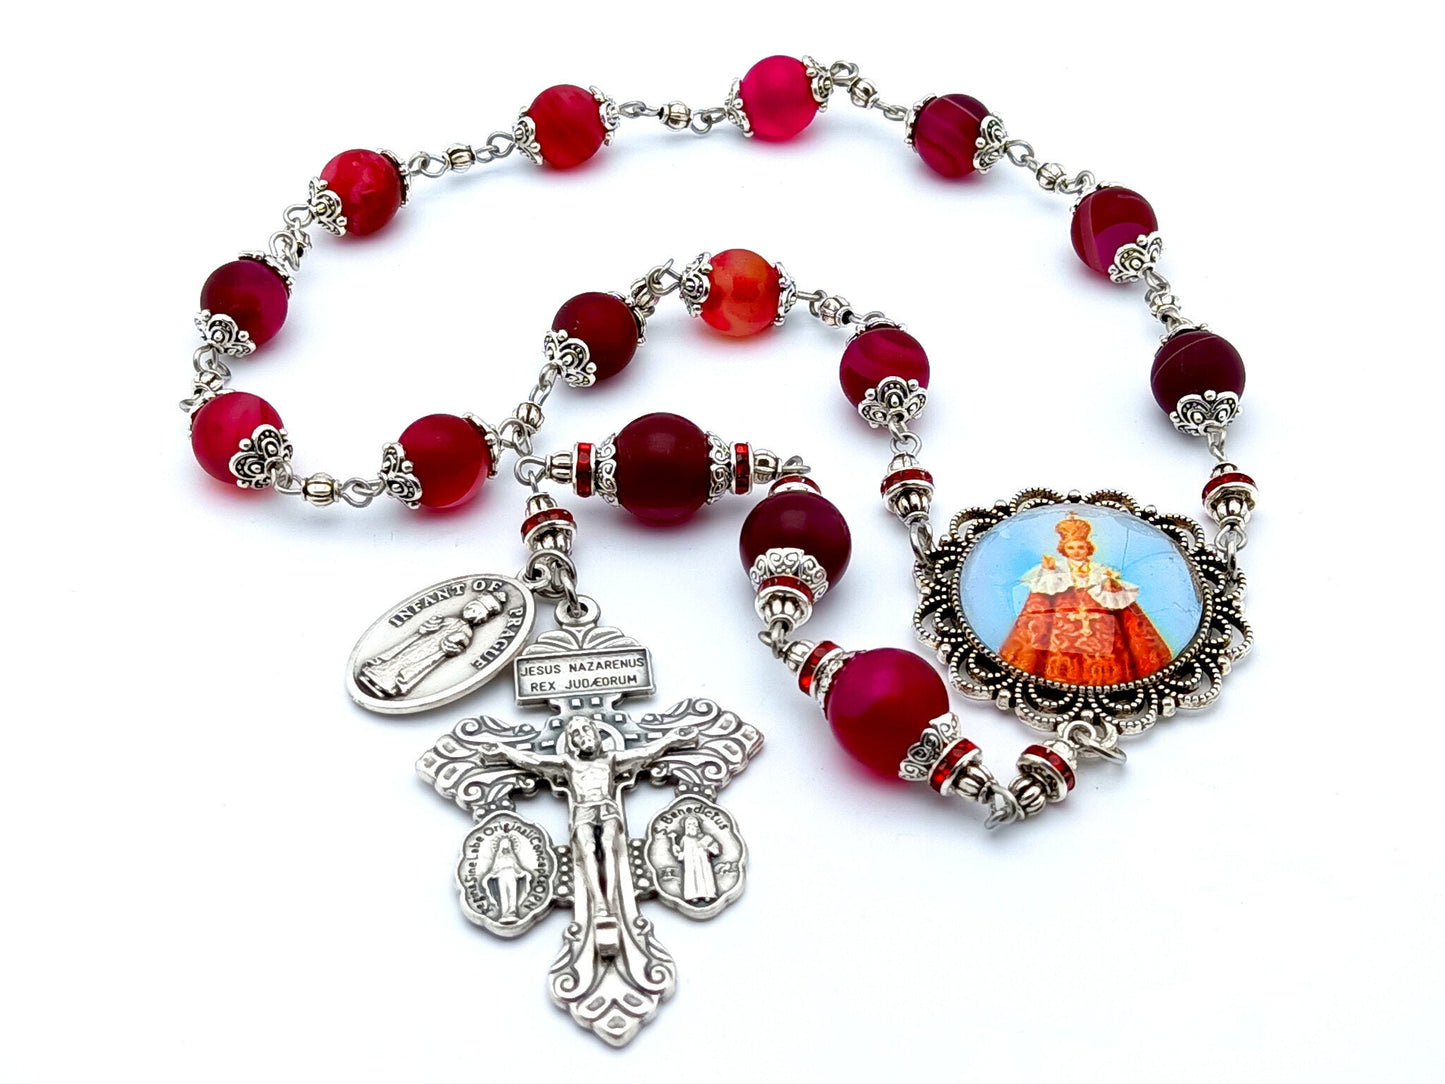 Infant of Prague unique rosary beads prayer chaplet with red agate gemstone beads, silver pardon crucifix and centre picture medal.